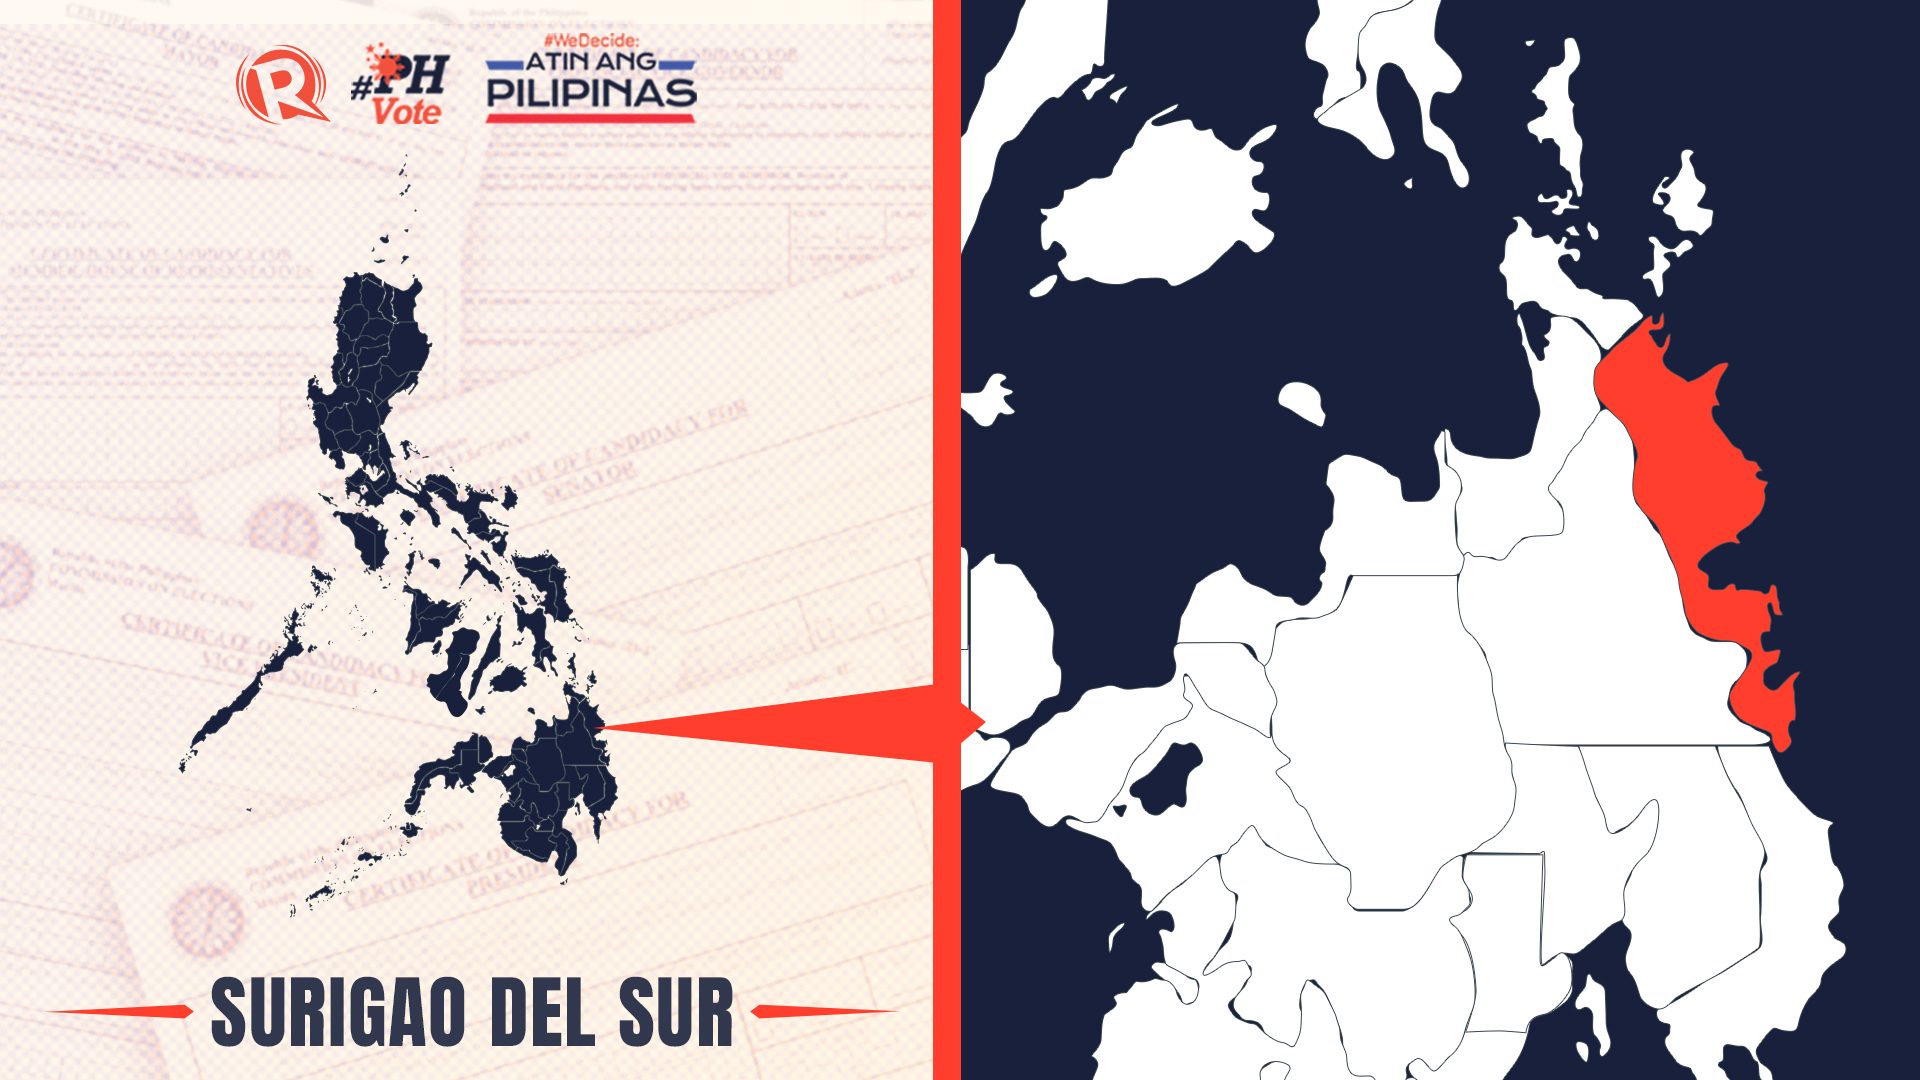 LIST: Who is running in Surigao del Sur in the 2022 Philippine elections?